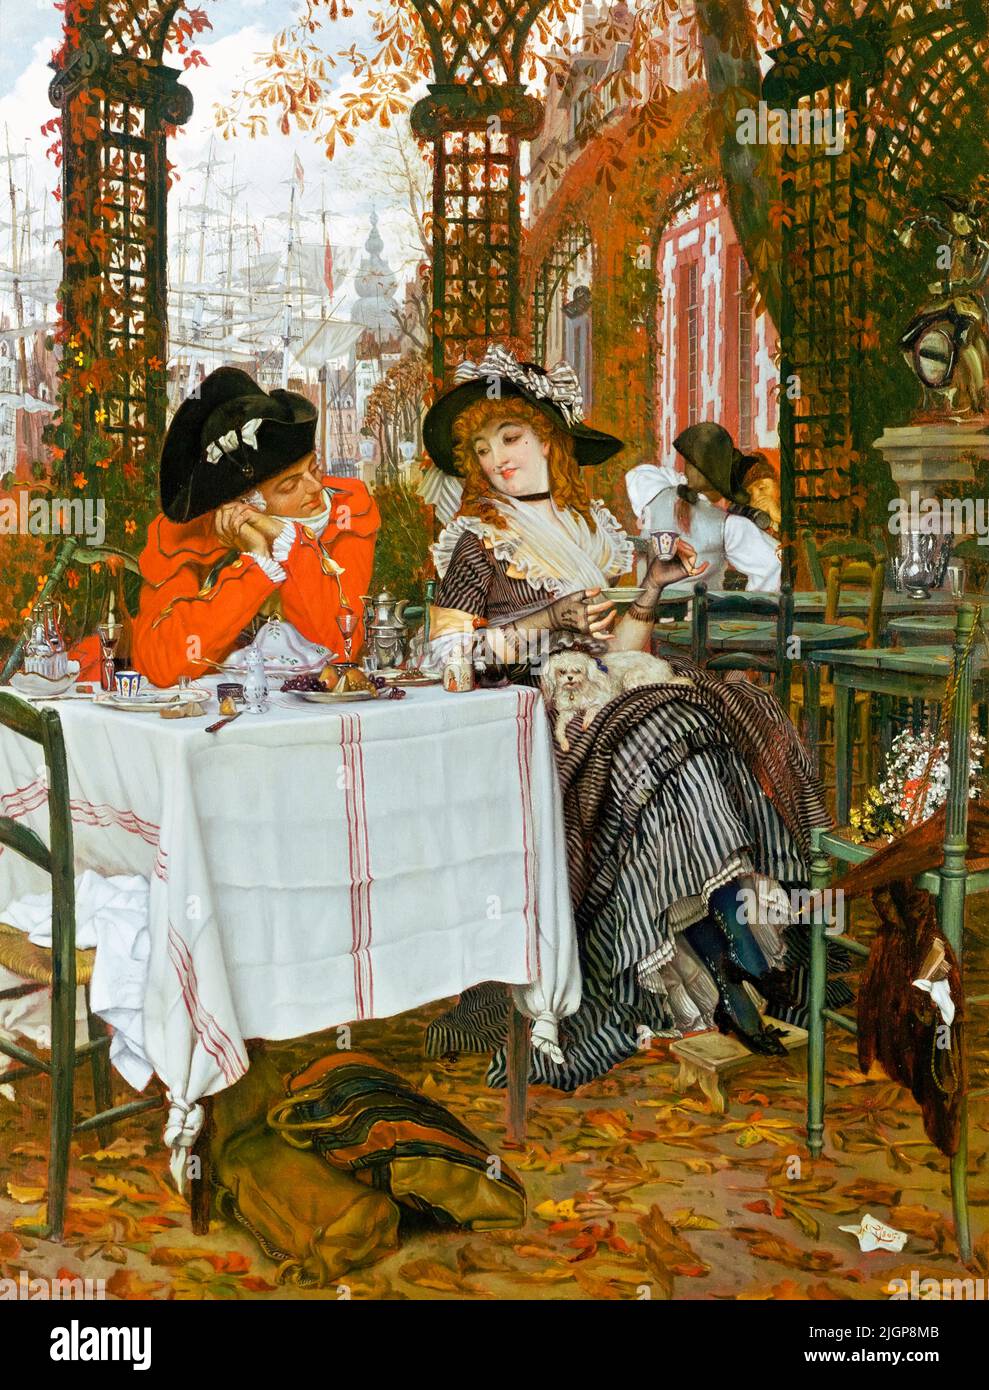 James Tissot, A Luncheon (Un Dejeuner), painting in oil on canvas, 1868 Stock Photo